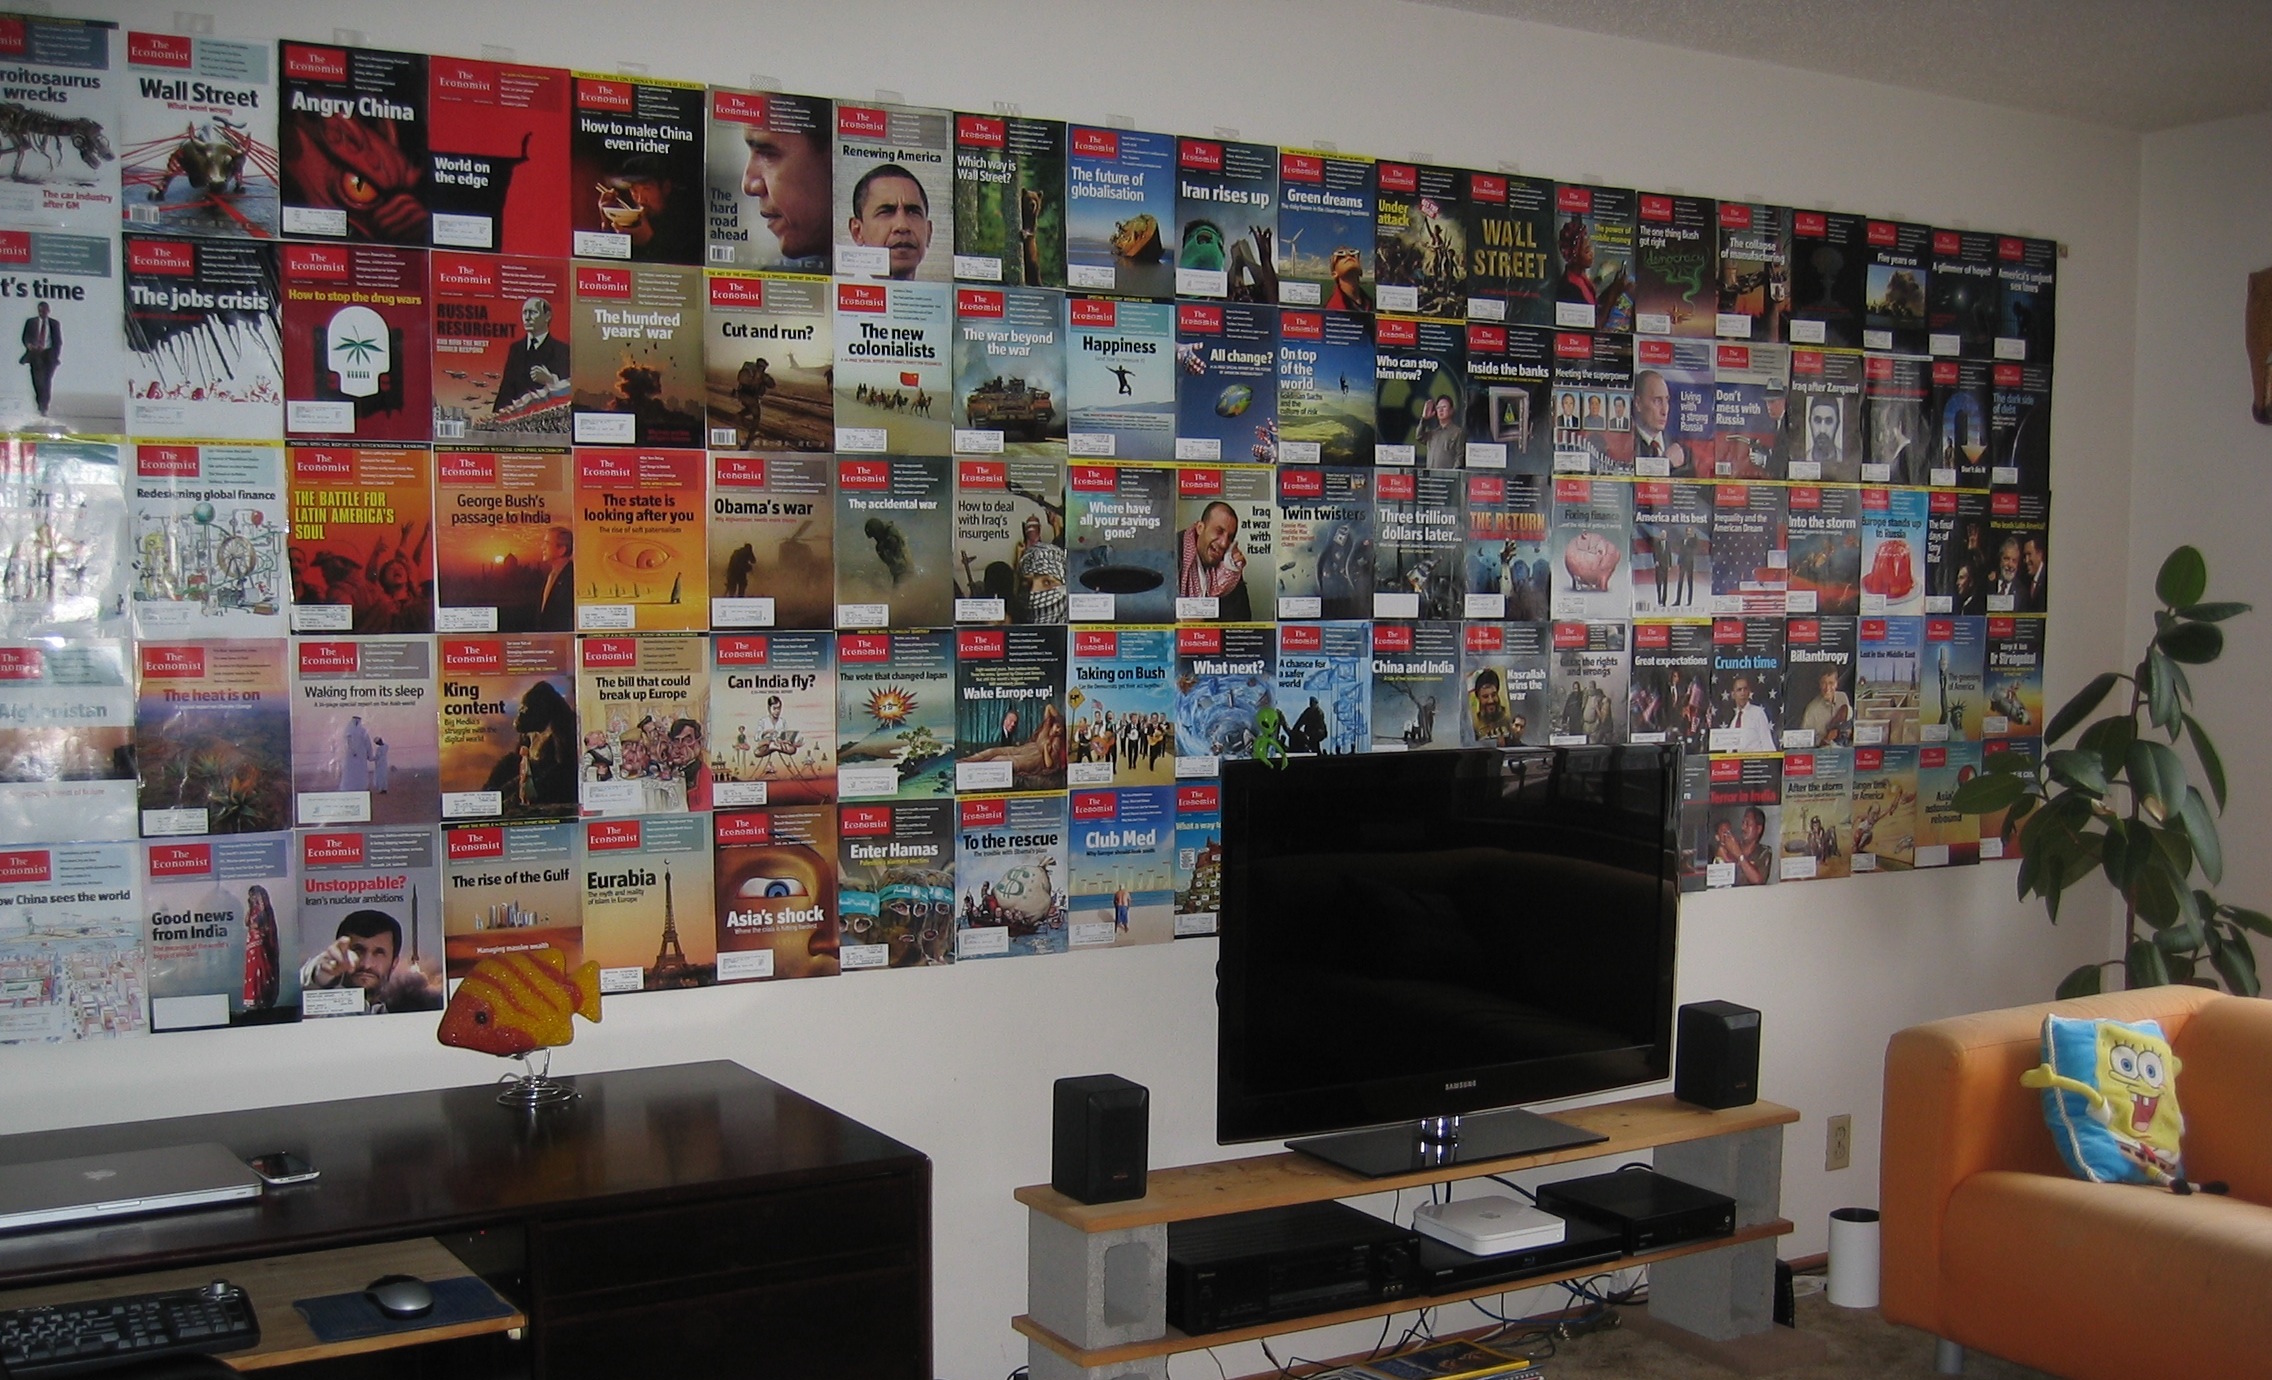 The Economist Wall Mural